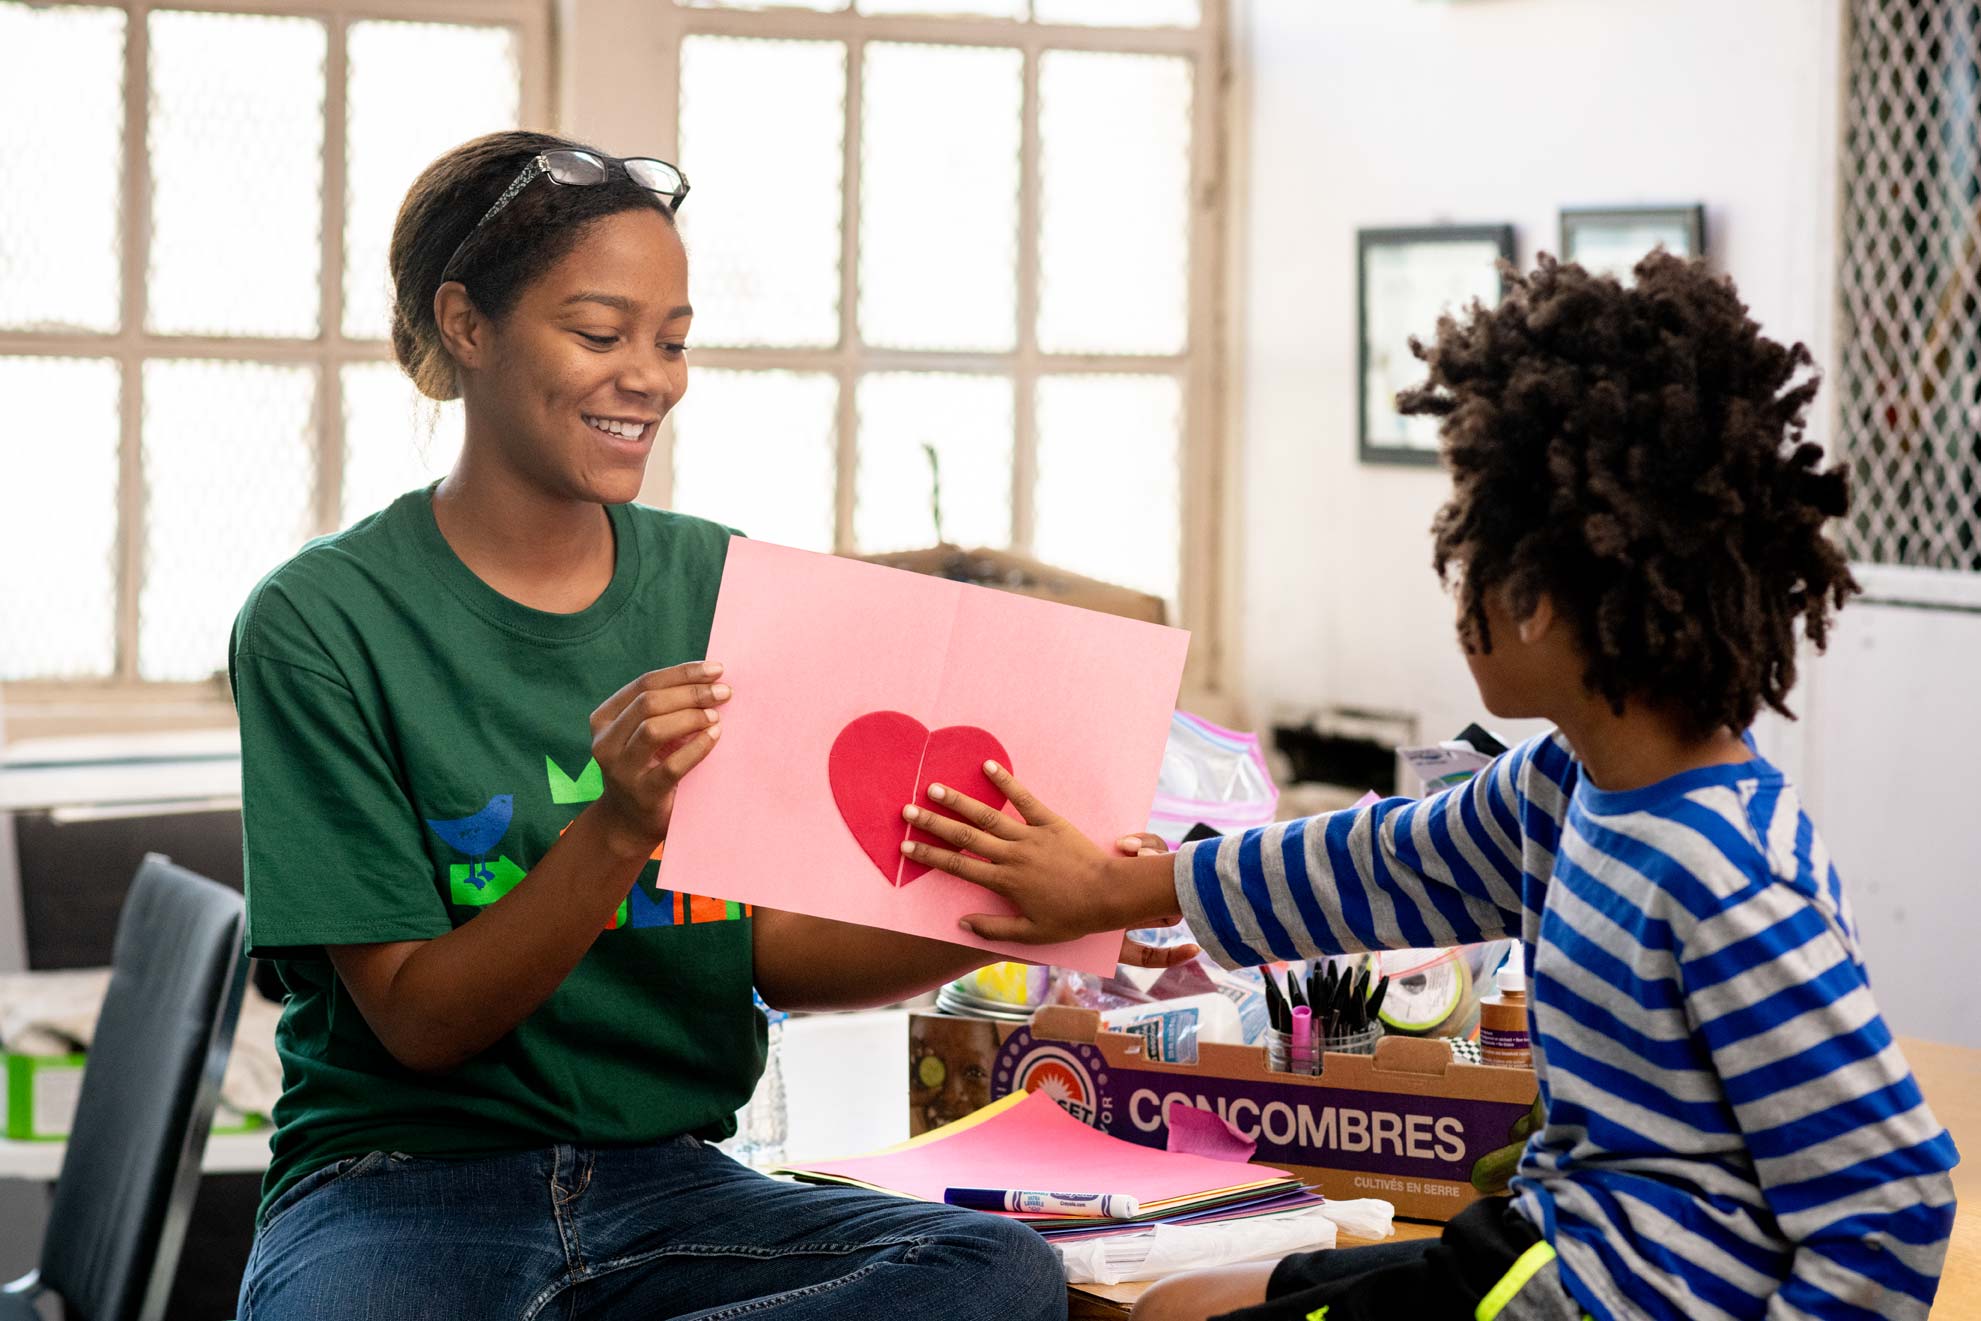 A teacher holds up a picture of a heart and a student reaches out and touches it